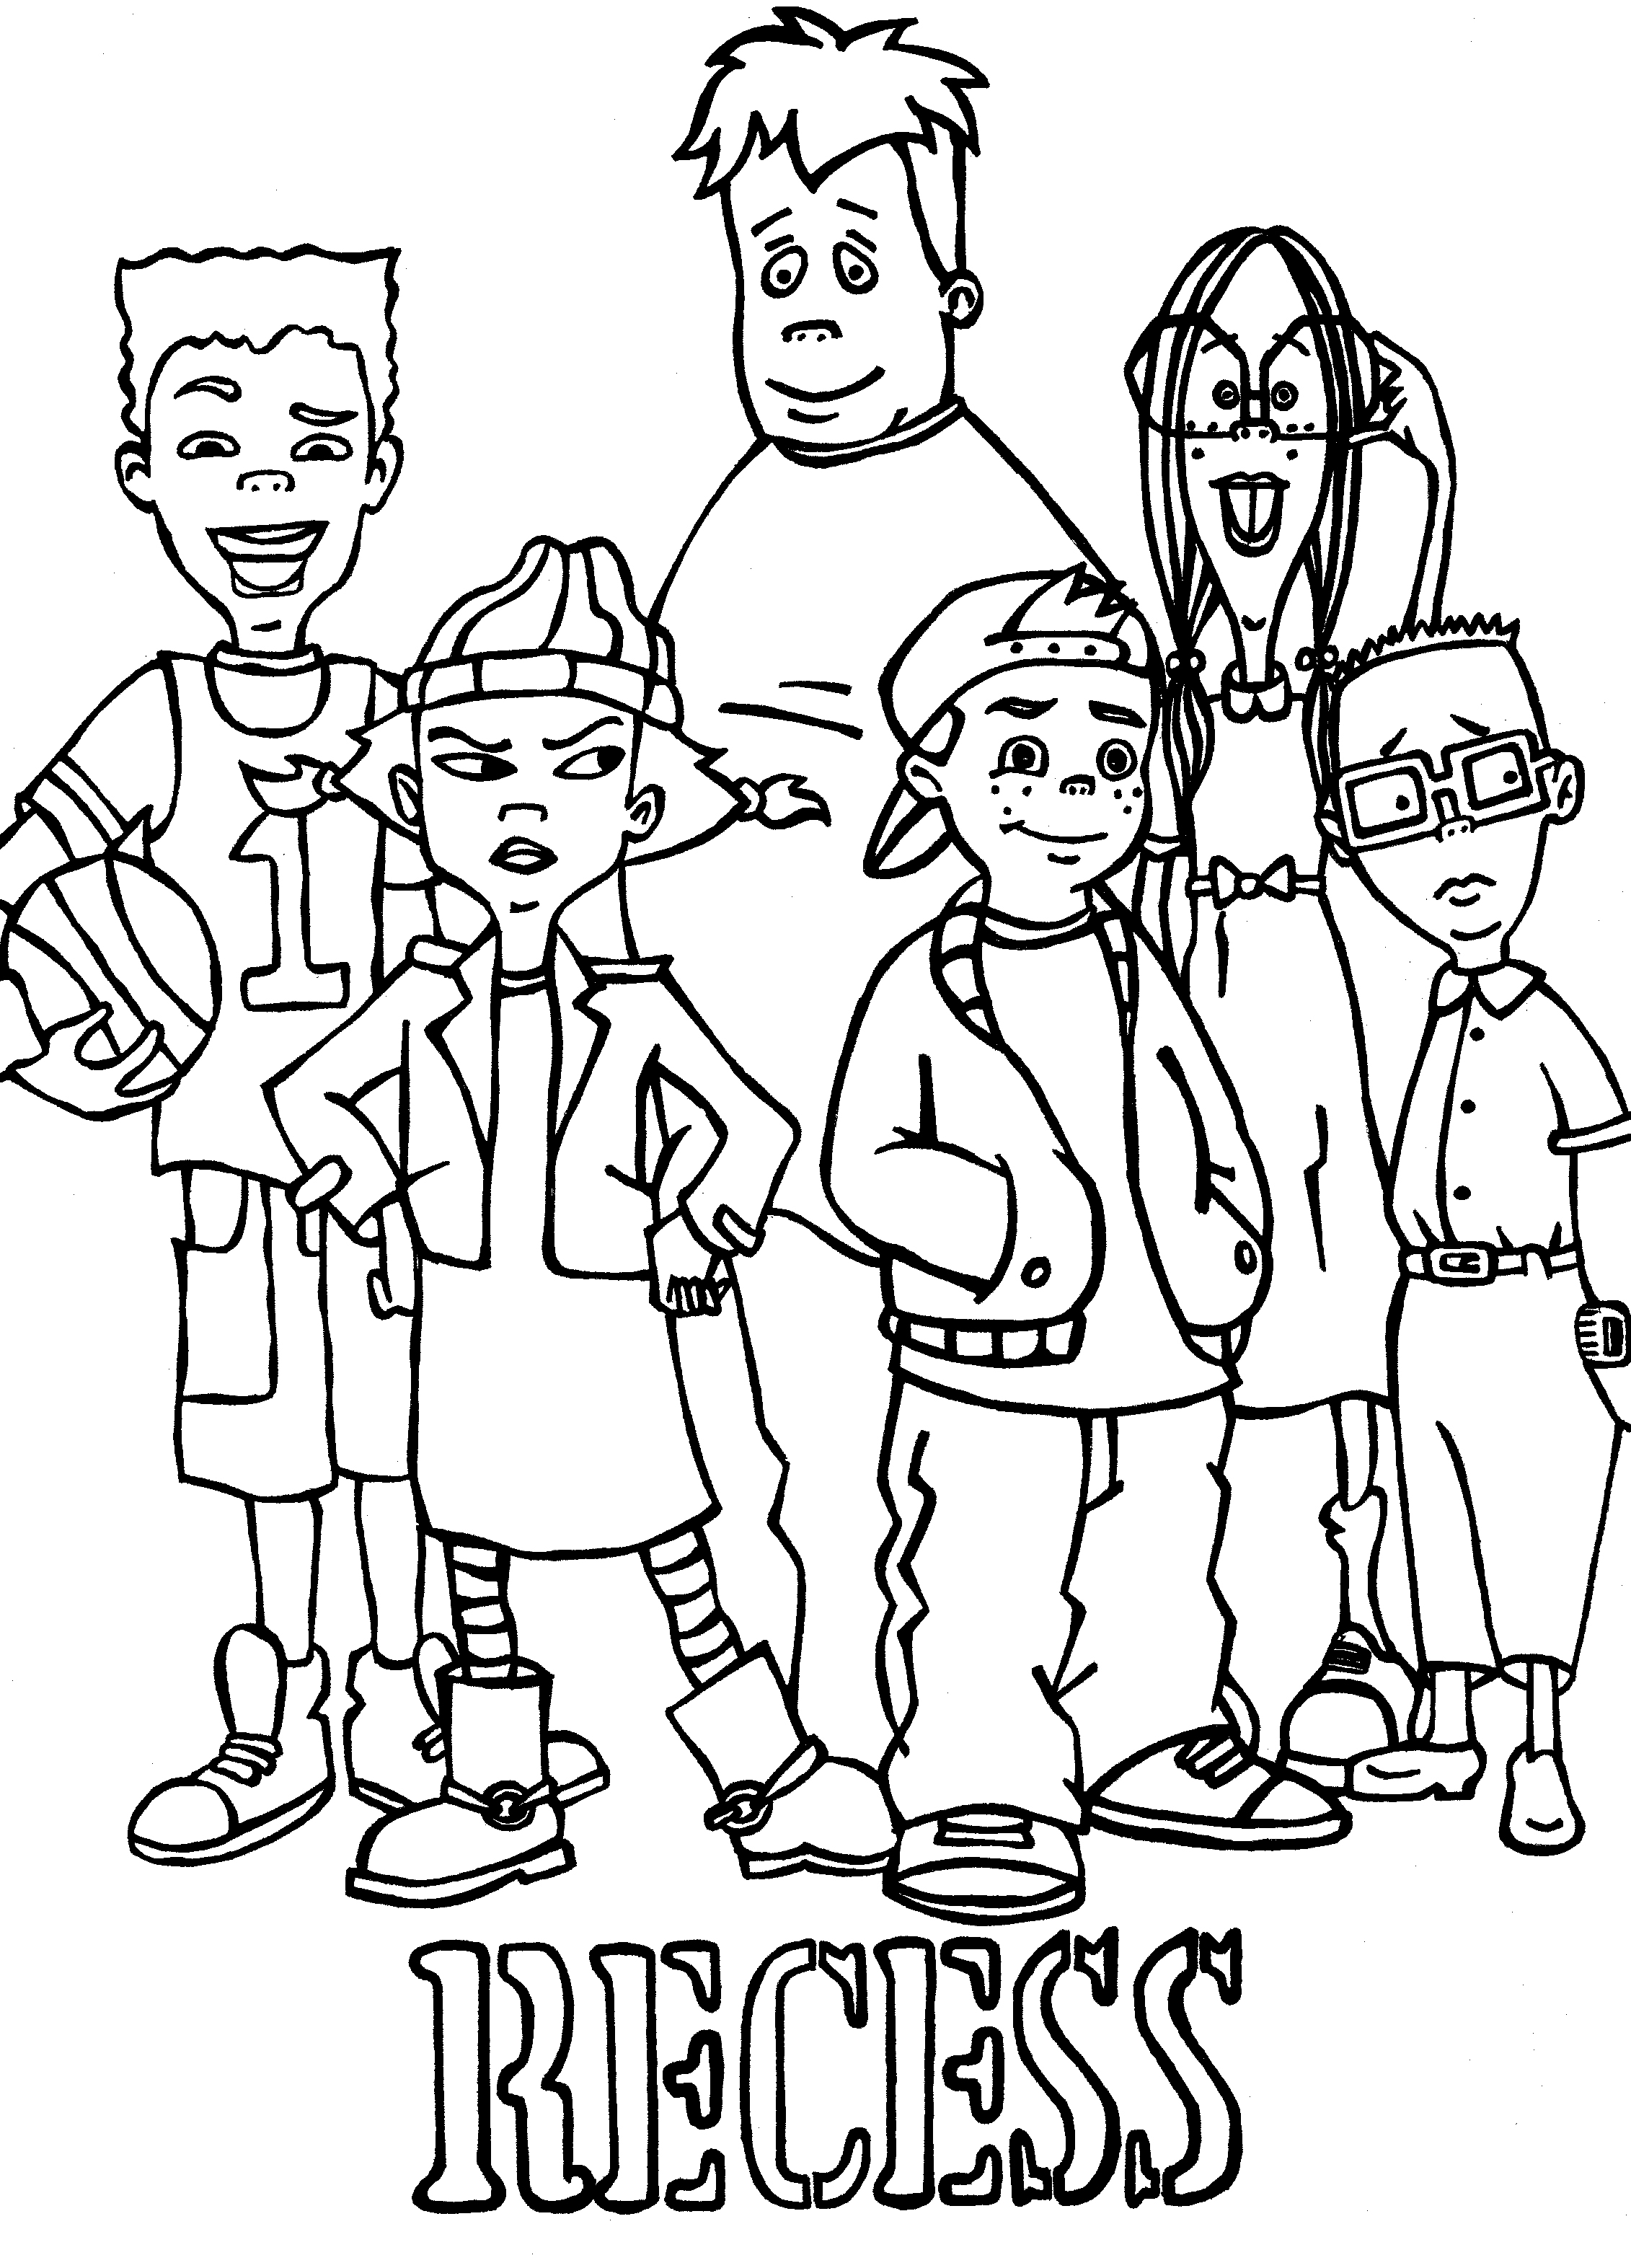 Recess group colouring image